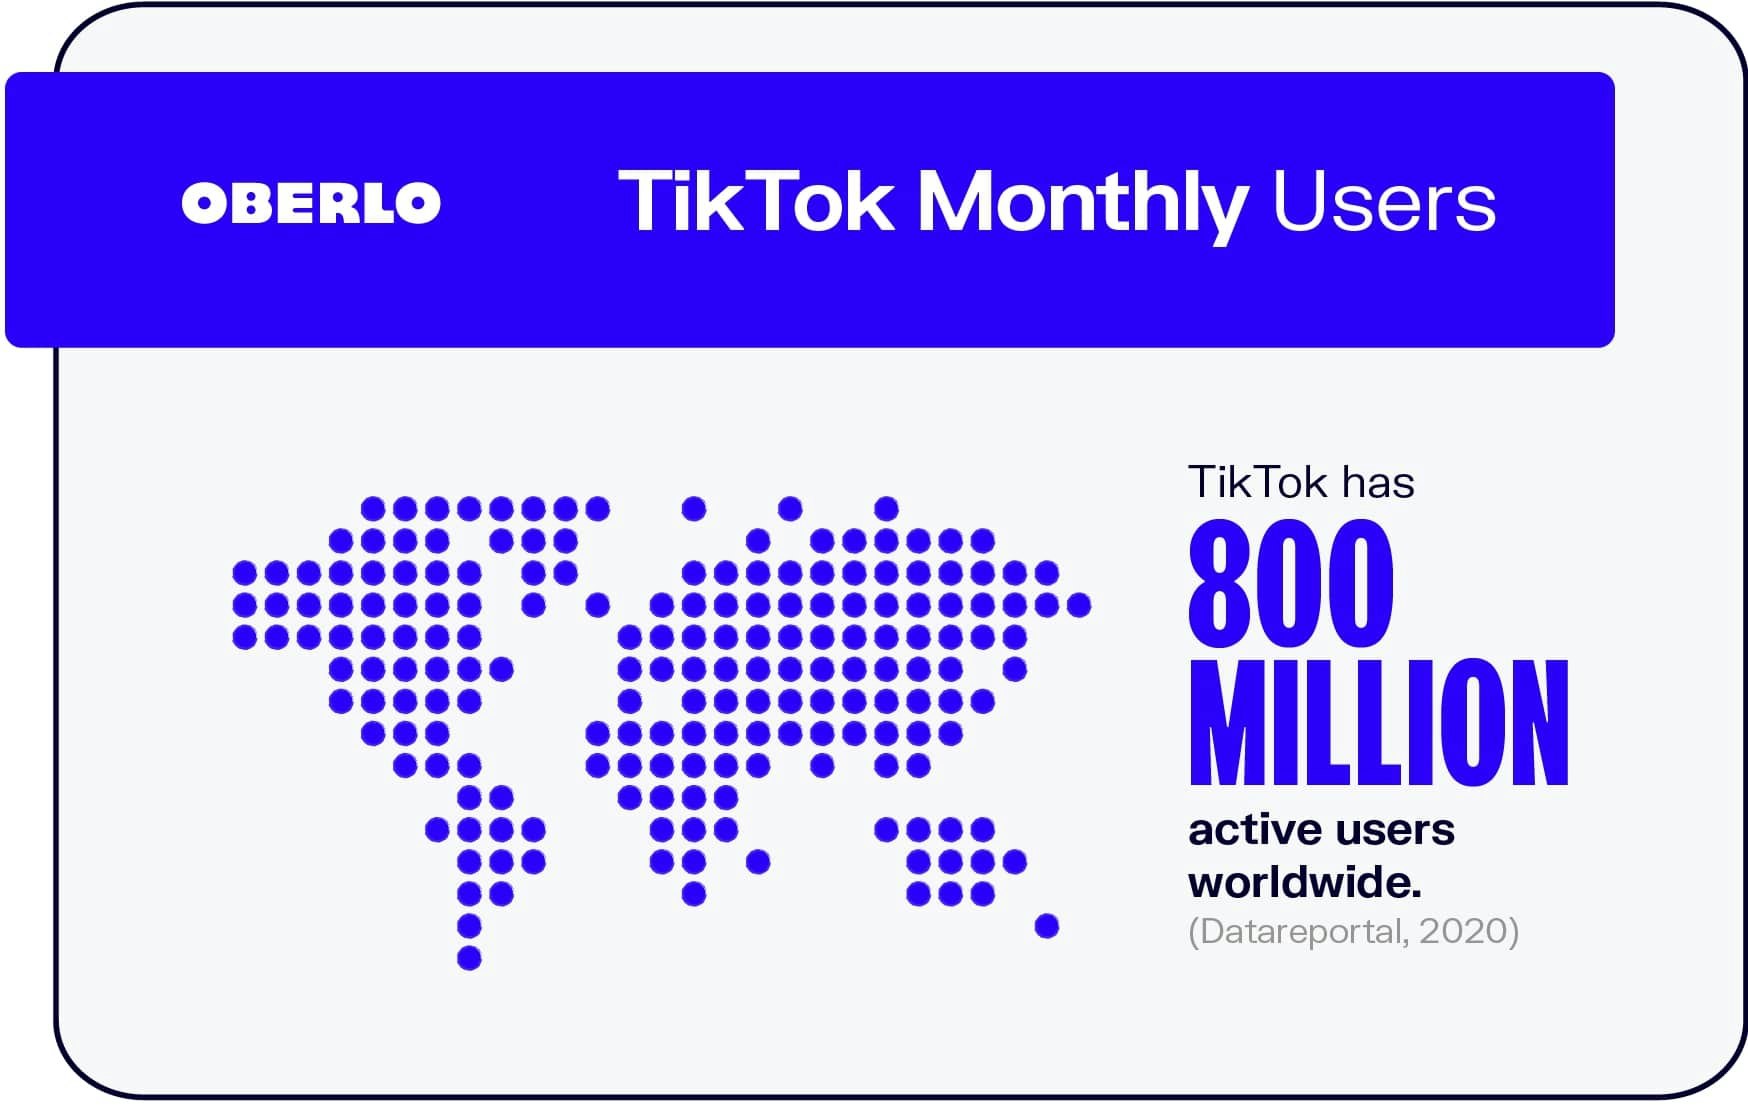 How Many Users Does TikTok Have?